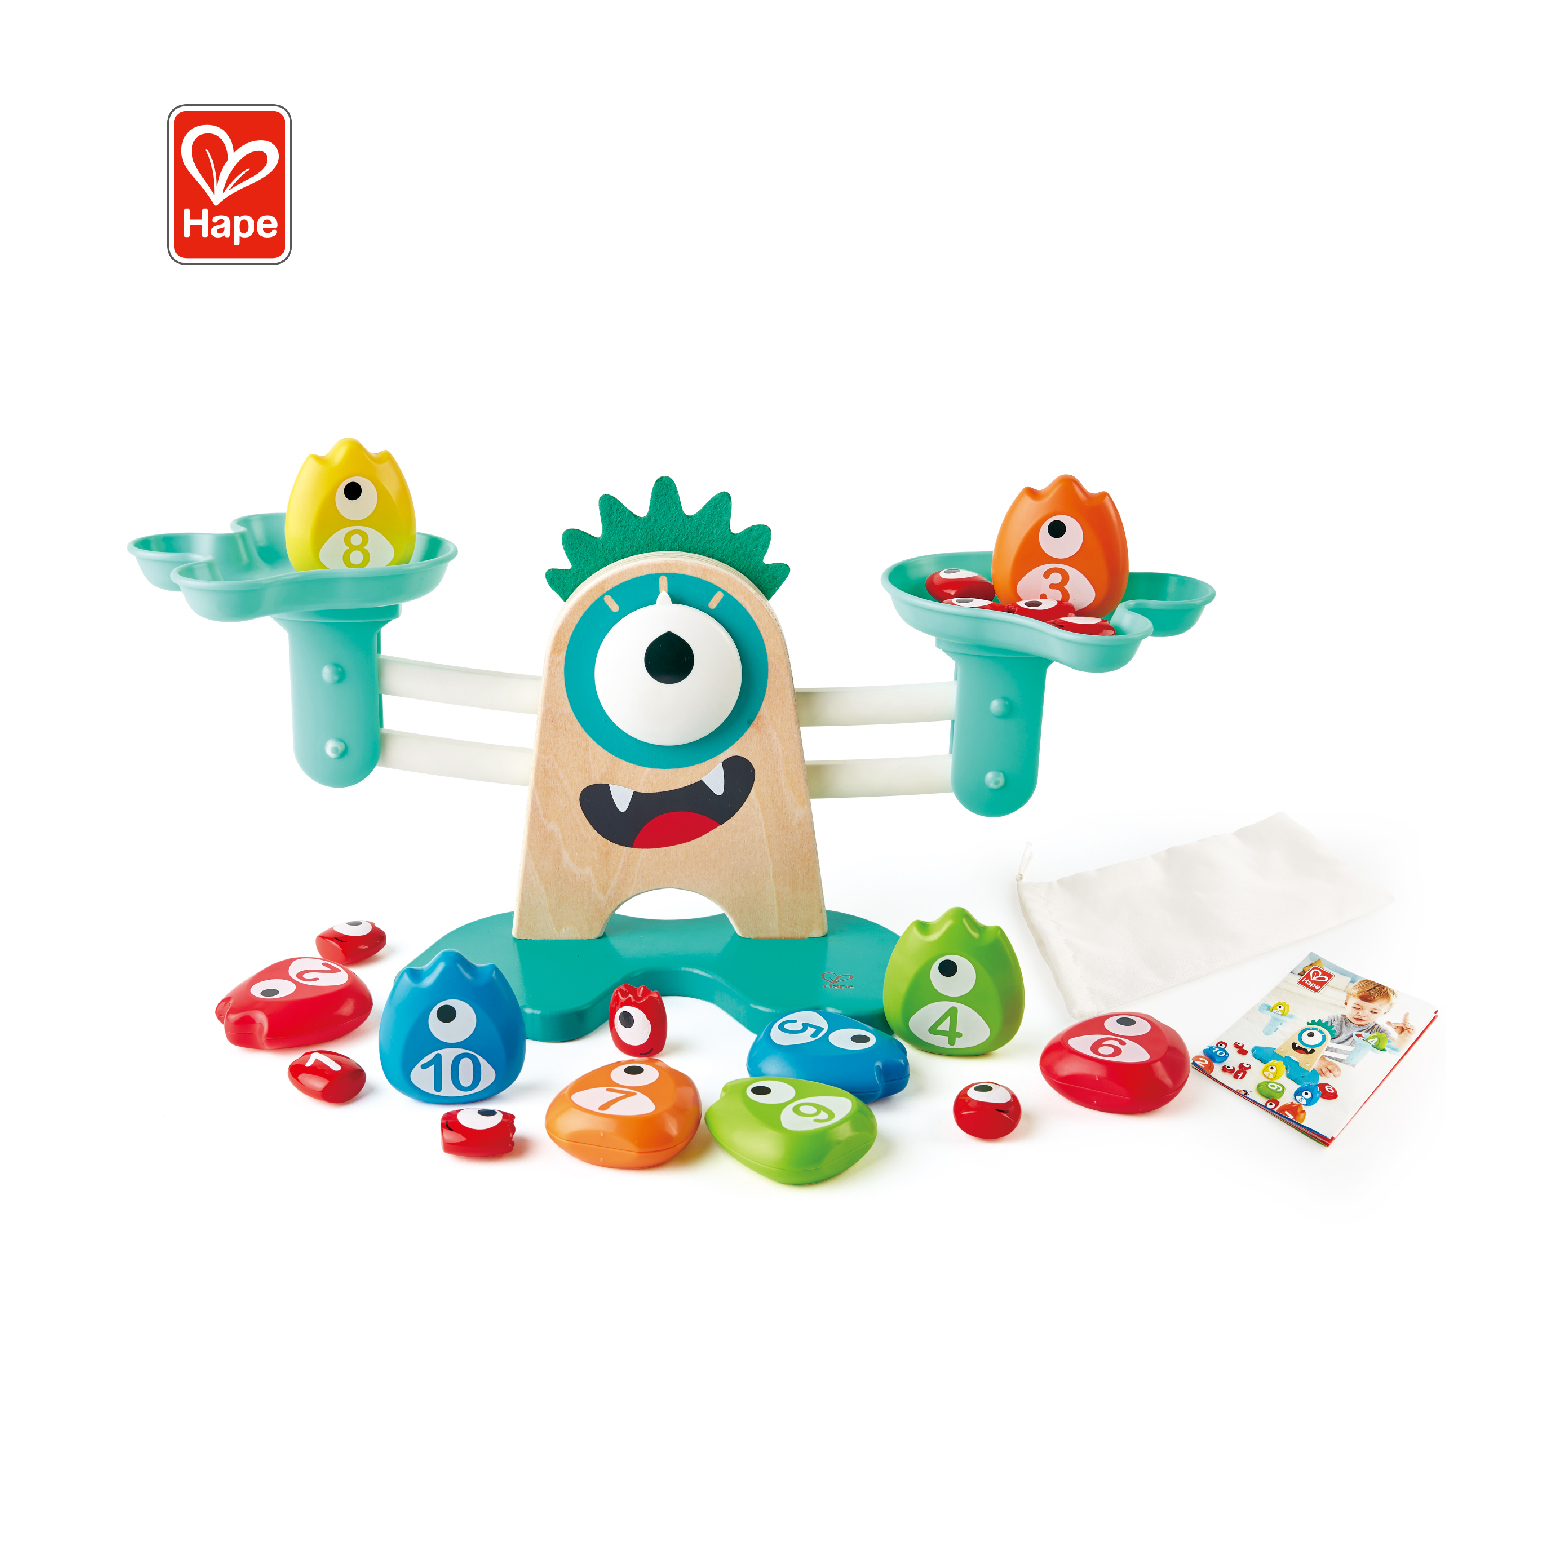 Hape Monster Math Scale | 22-Piece Wooden Counting, Balancing, Measuring Weight Toy Playset For Preschoolers